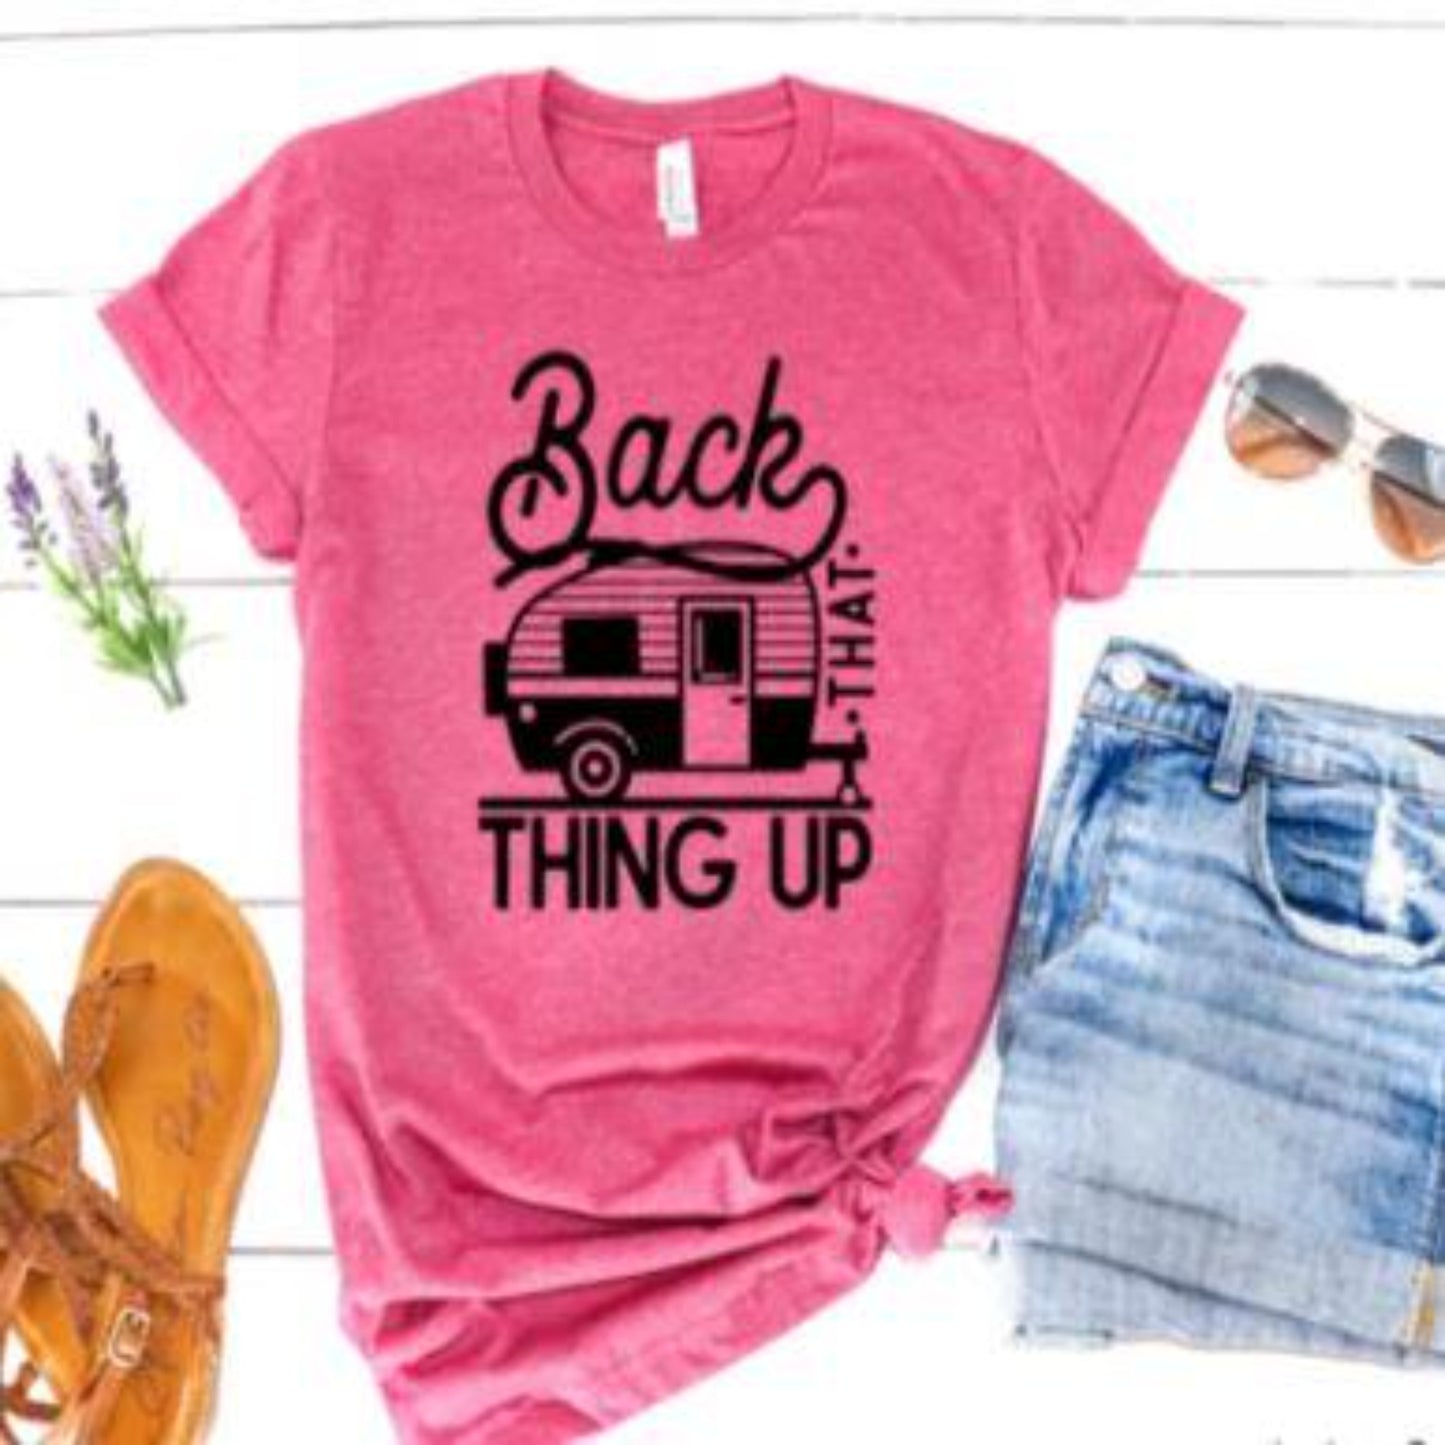 back_that_thing_up Specialty Tee soft shirt comfortable tshirt travel wear